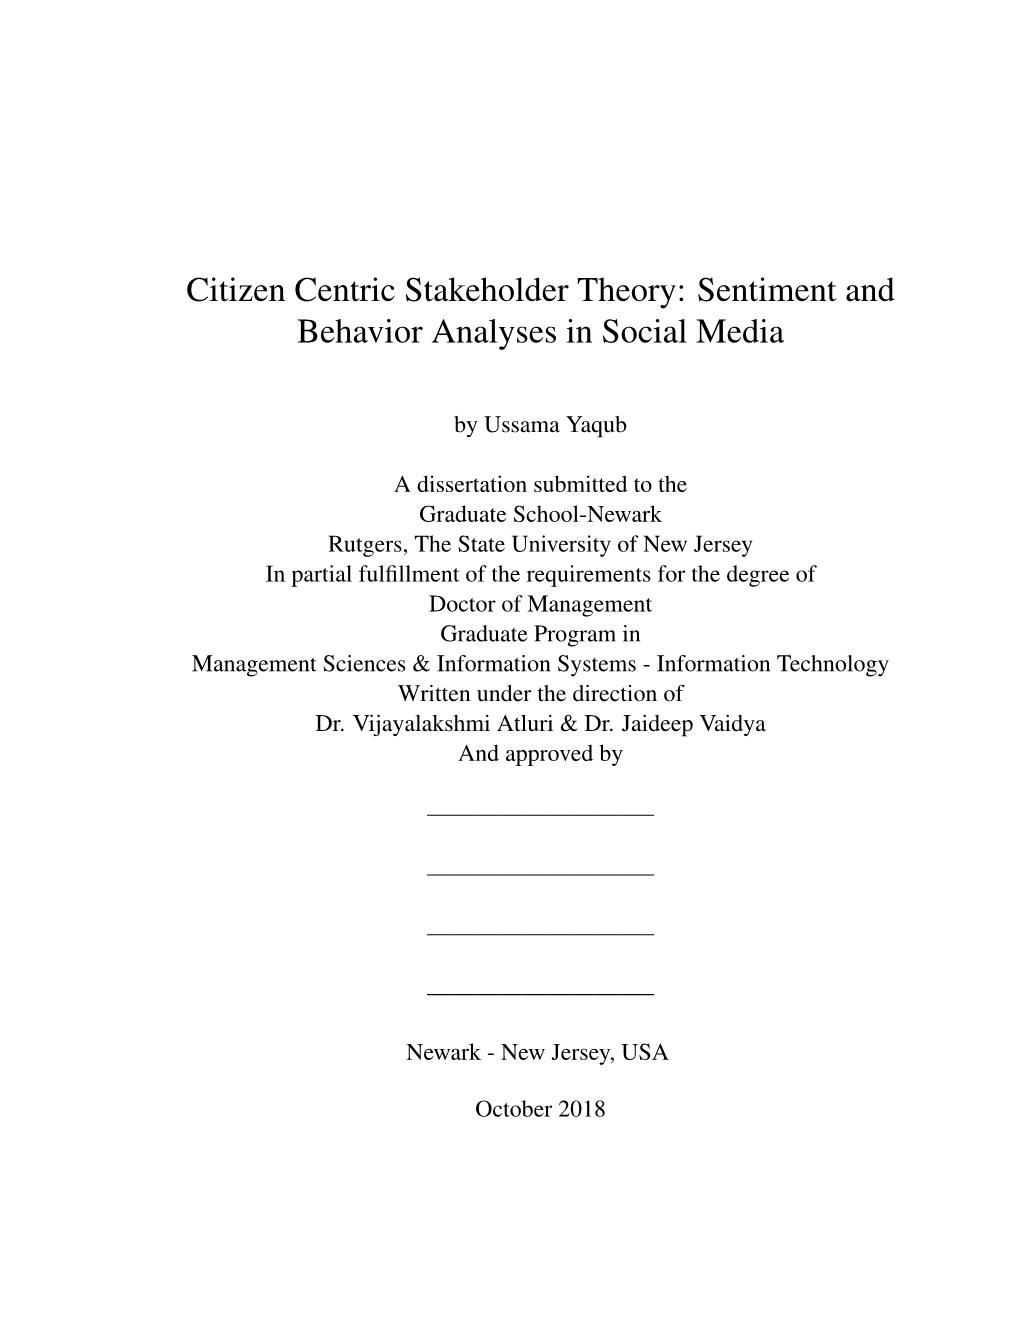 Citizen Centric Stakeholder Theory: Sentiment and Behavior Analyses in Social Media